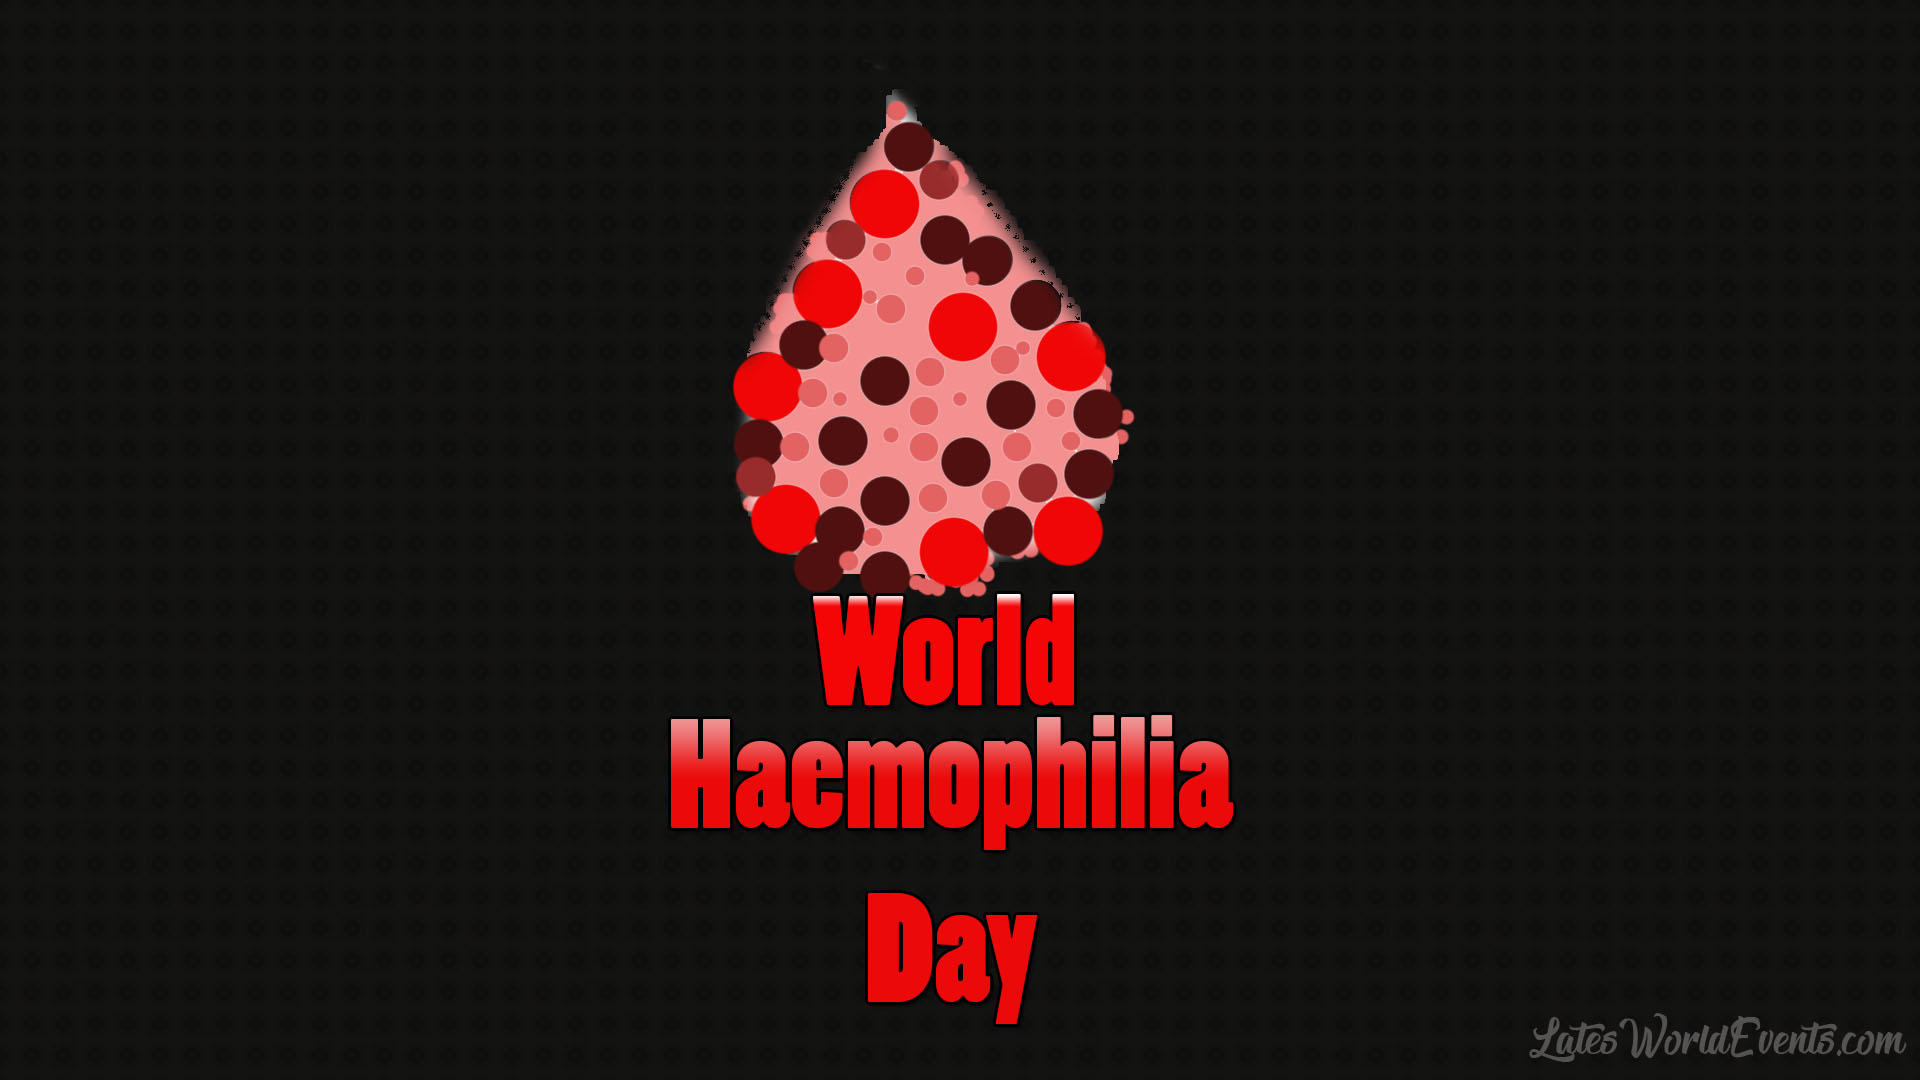 2020-world-heamophilia-day-poster